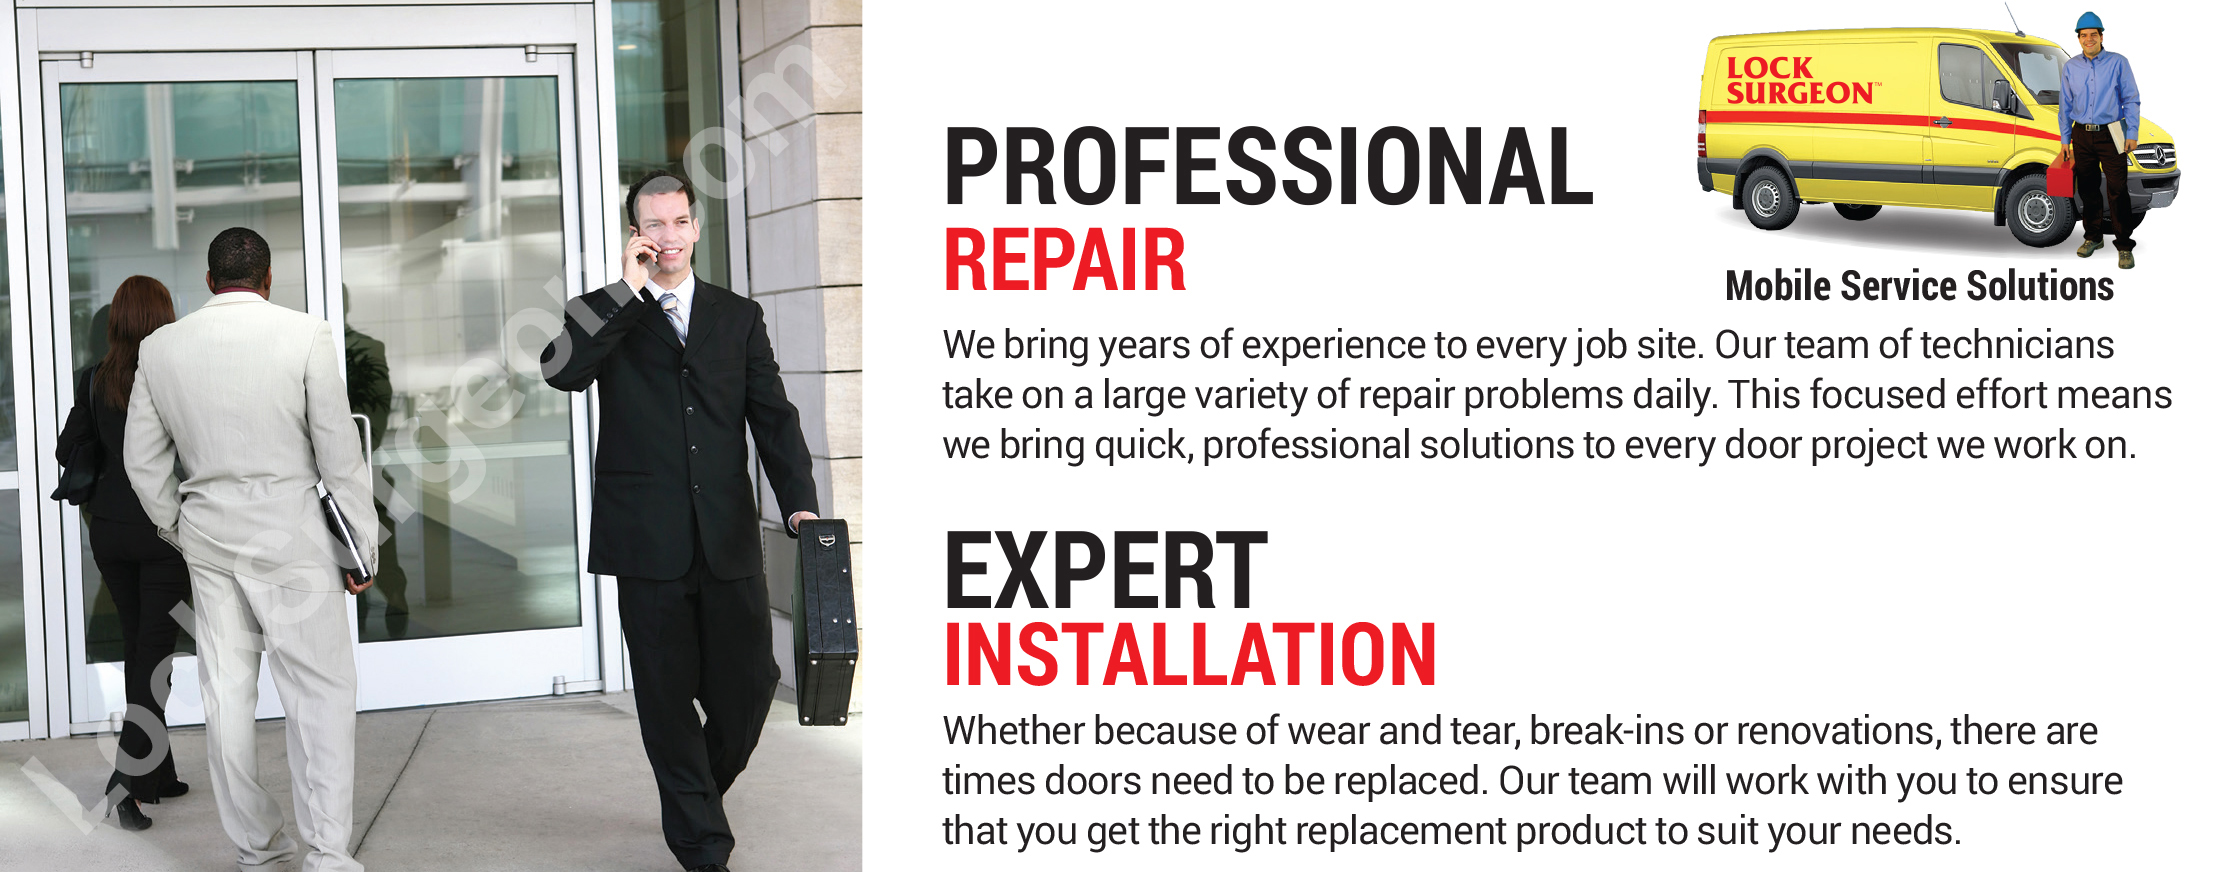 Lock Surgeon provides mobile door repair service Homes and businesses benefit from door solutions.